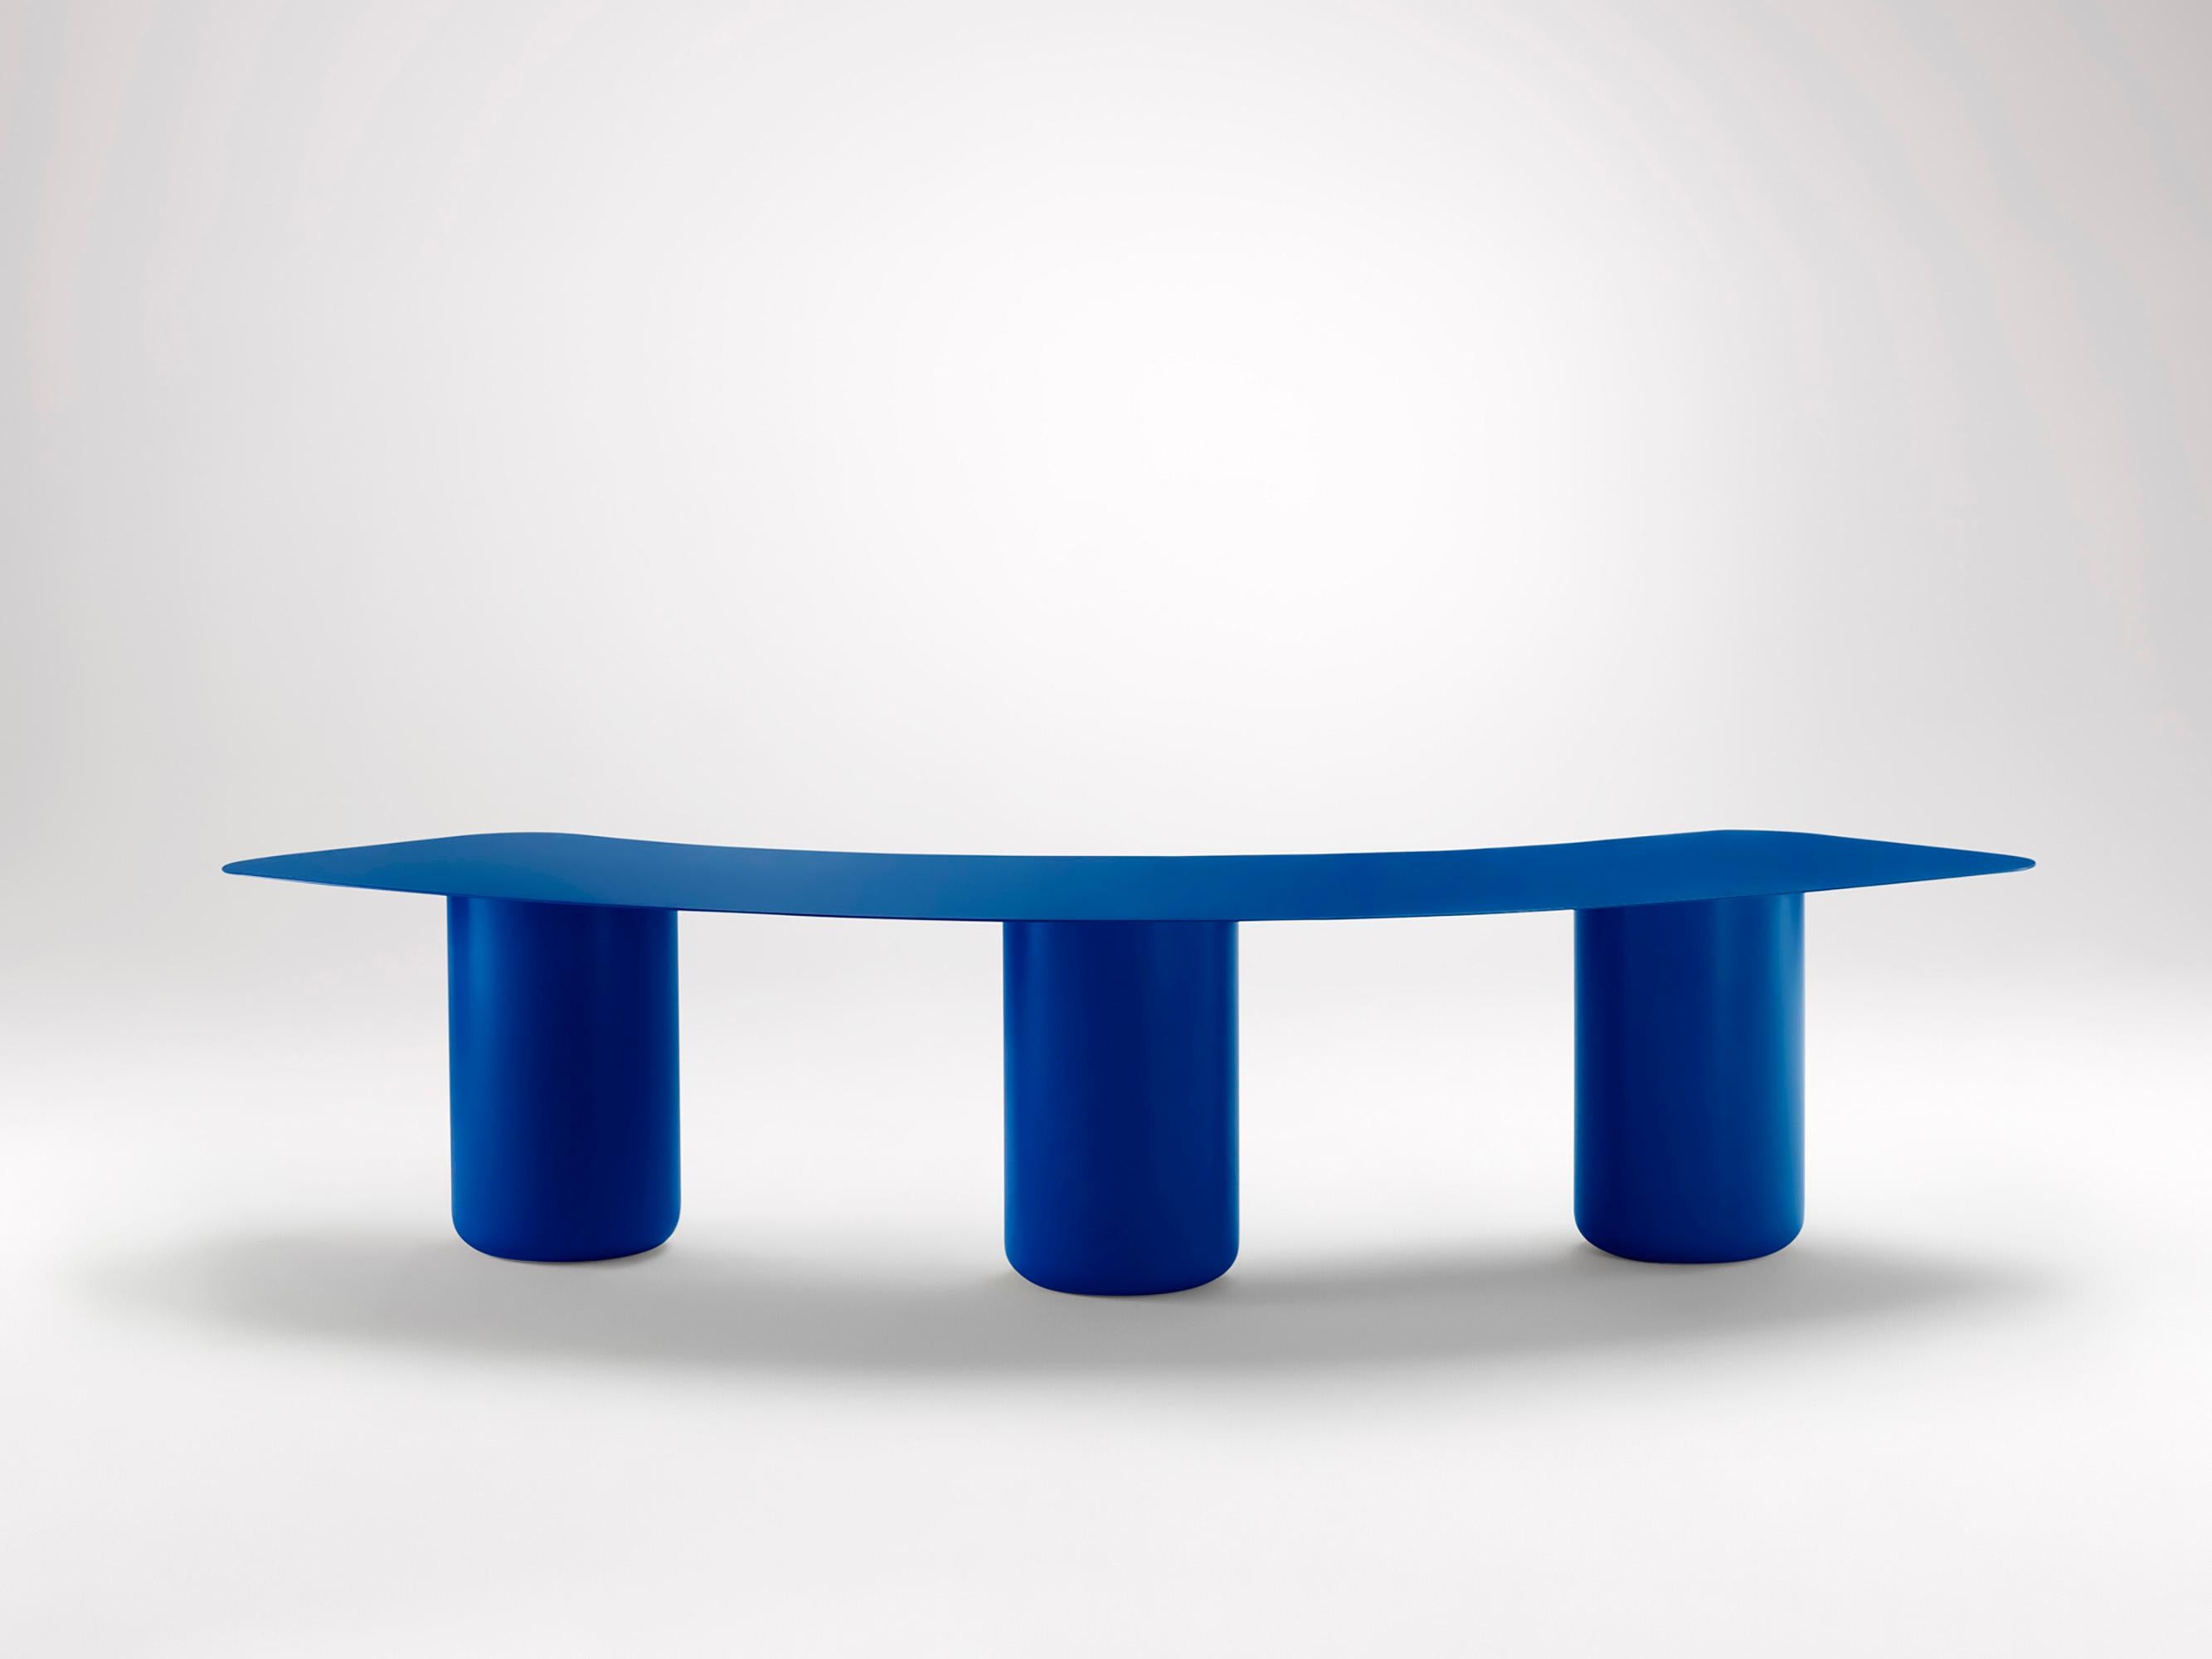 Small Vivid Blue Curved Bench by Coco Flip
Dimensions: D 65 x W 165 x H 42 cm
Materials: Mild steel, powder-coated with zinc undercoat. 
Weight: 42 kg

Coco Flip is a Melbourne based furniture and lighting design studio, run by us, Kate Stokes and